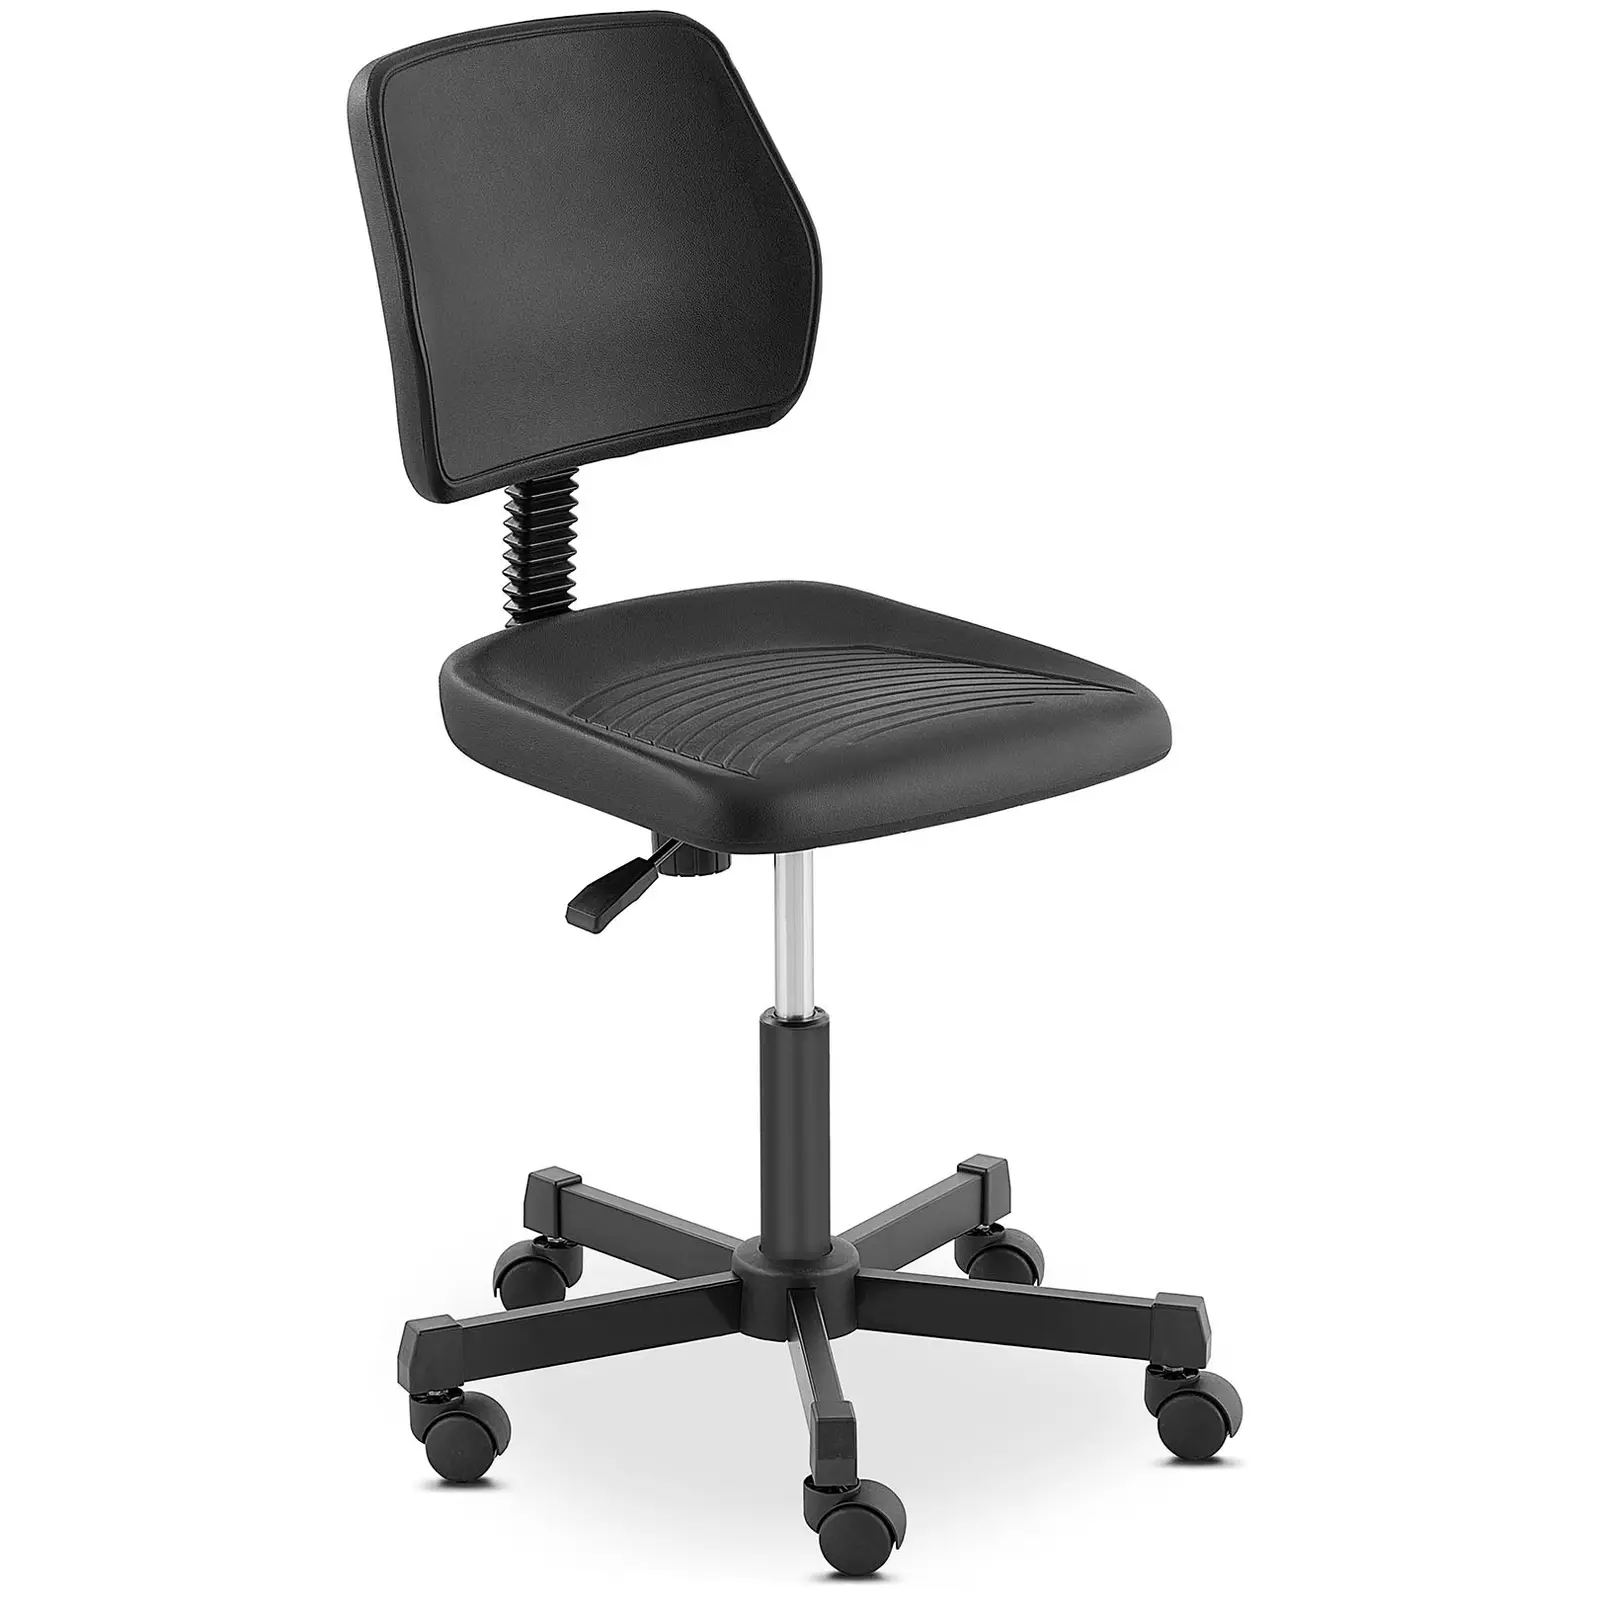 Laboratory chair - 120 kg - Black - height adjustable from 410 - 550 mm